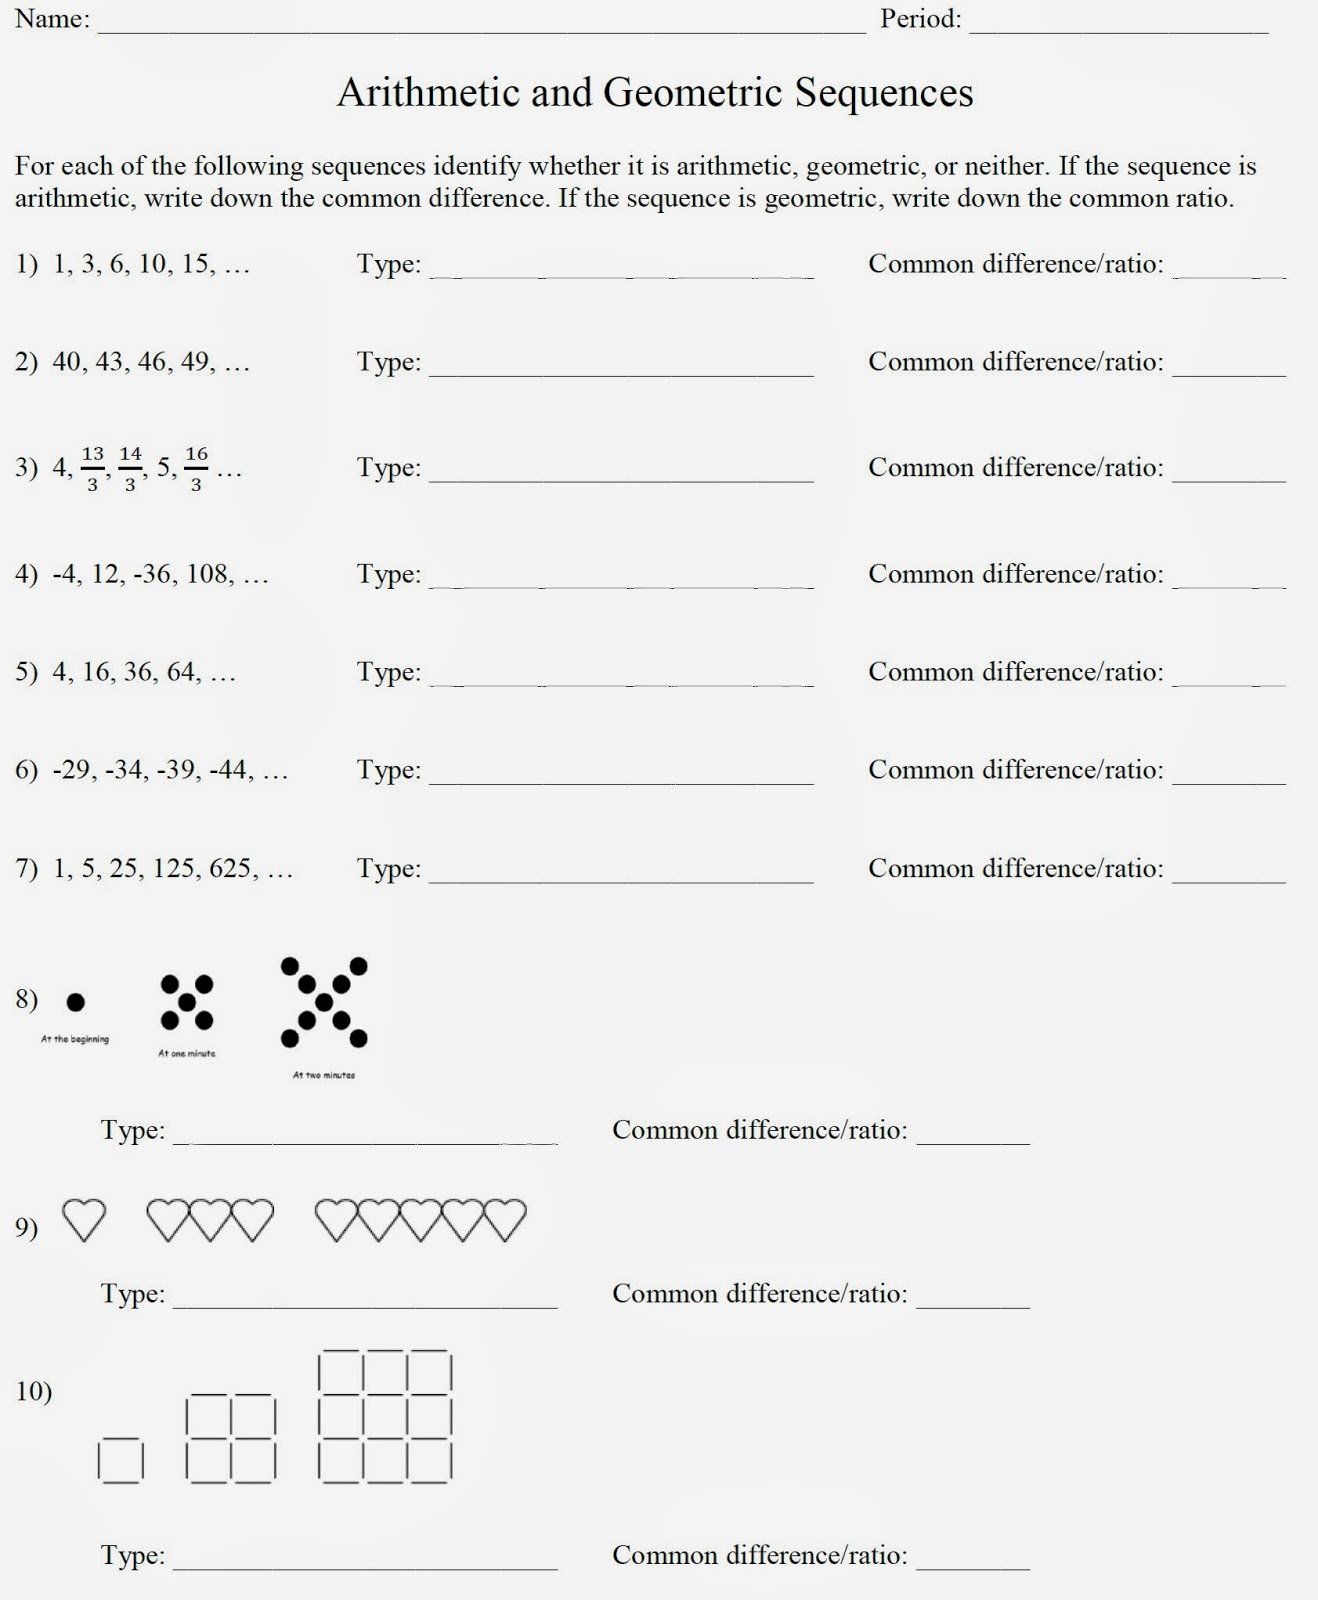 Geometric and Arithmetic Sequence Worksheet Elegant Mr Matt S Math Classes assignment Arithmetic and